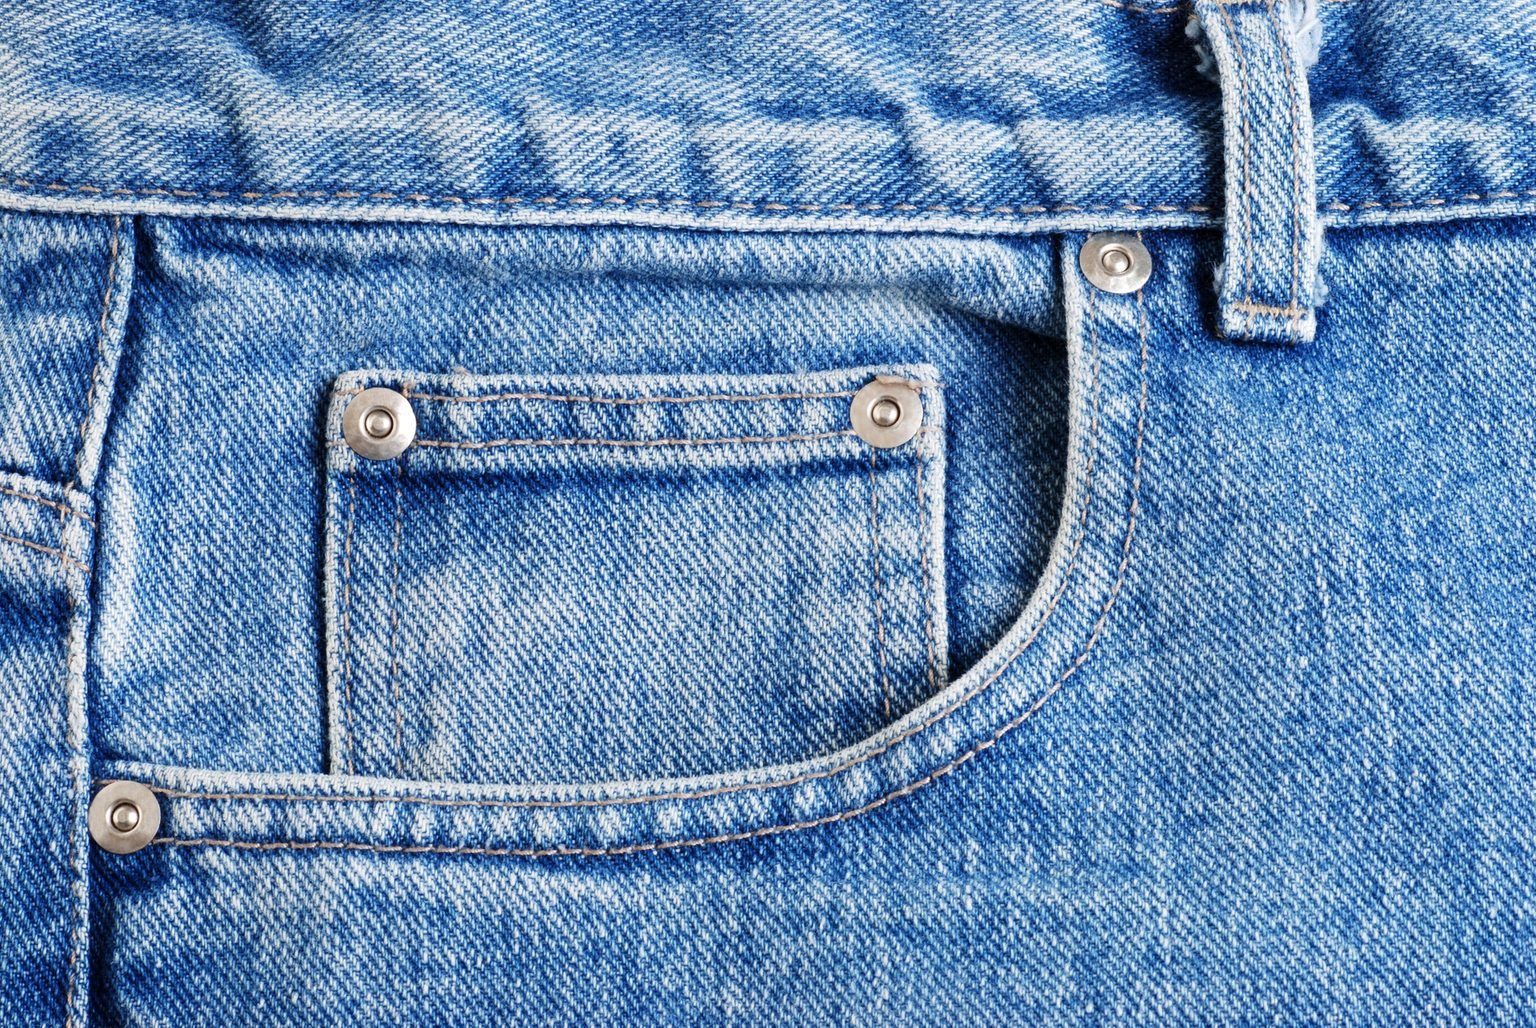 Why Jeans Have Those Tiny Pockets | Reader's Digest